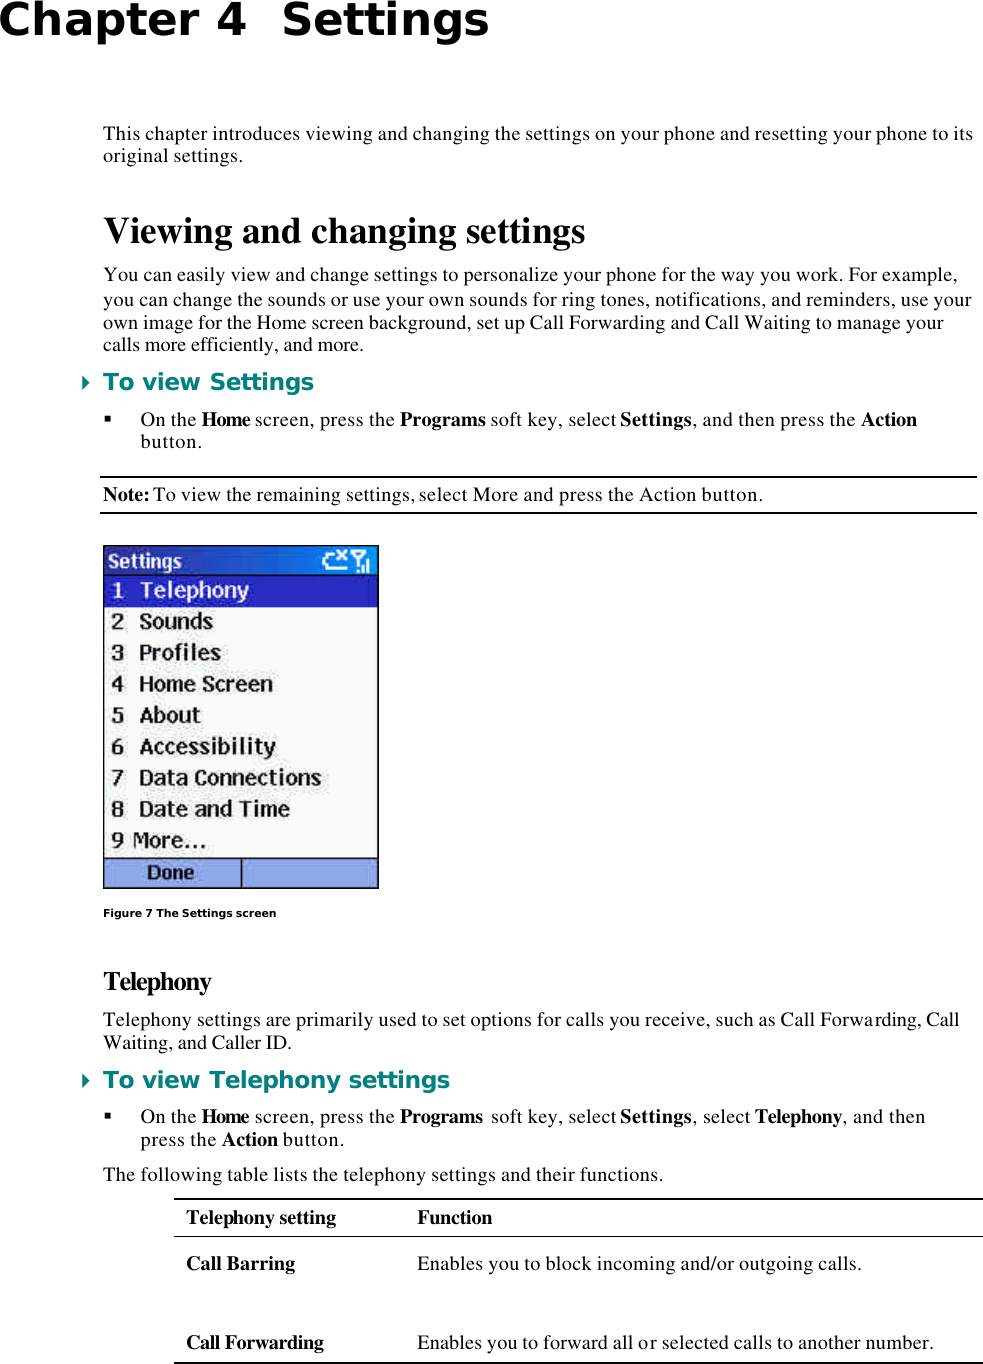 Chapter 4  Settings This chapter introduces viewing and changing the settings on your phone and resetting your phone to its original settings. Viewing and changing settings You can easily view and change settings to personalize your phone for the way you work. For example, you can change the sounds or use your own sounds for ring tones, notifications, and reminders, use your own image for the Home screen background, set up Call Forwarding and Call Waiting to manage your calls more efficiently, and more. 4 To view Settings § On the Home screen, press the Programs soft key, select Settings, and then press the Action button. Note: To view the remaining settings, select More and press the Action button.  Figure 7 The Settings screen Telephony Telephony settings are primarily used to set options for calls you receive, such as Call Forwarding, Call Waiting, and Caller ID. 4 To view Telephony settings § On the Home screen, press the Programs soft key, select Settings, select Telephony, and then press the Action button. The following table lists the telephony settings and their functions. Telephony setting Function Call Barring Enables you to block incoming and/or outgoing calls.  Call Forwarding Enables you to forward all or selected calls to another number. 